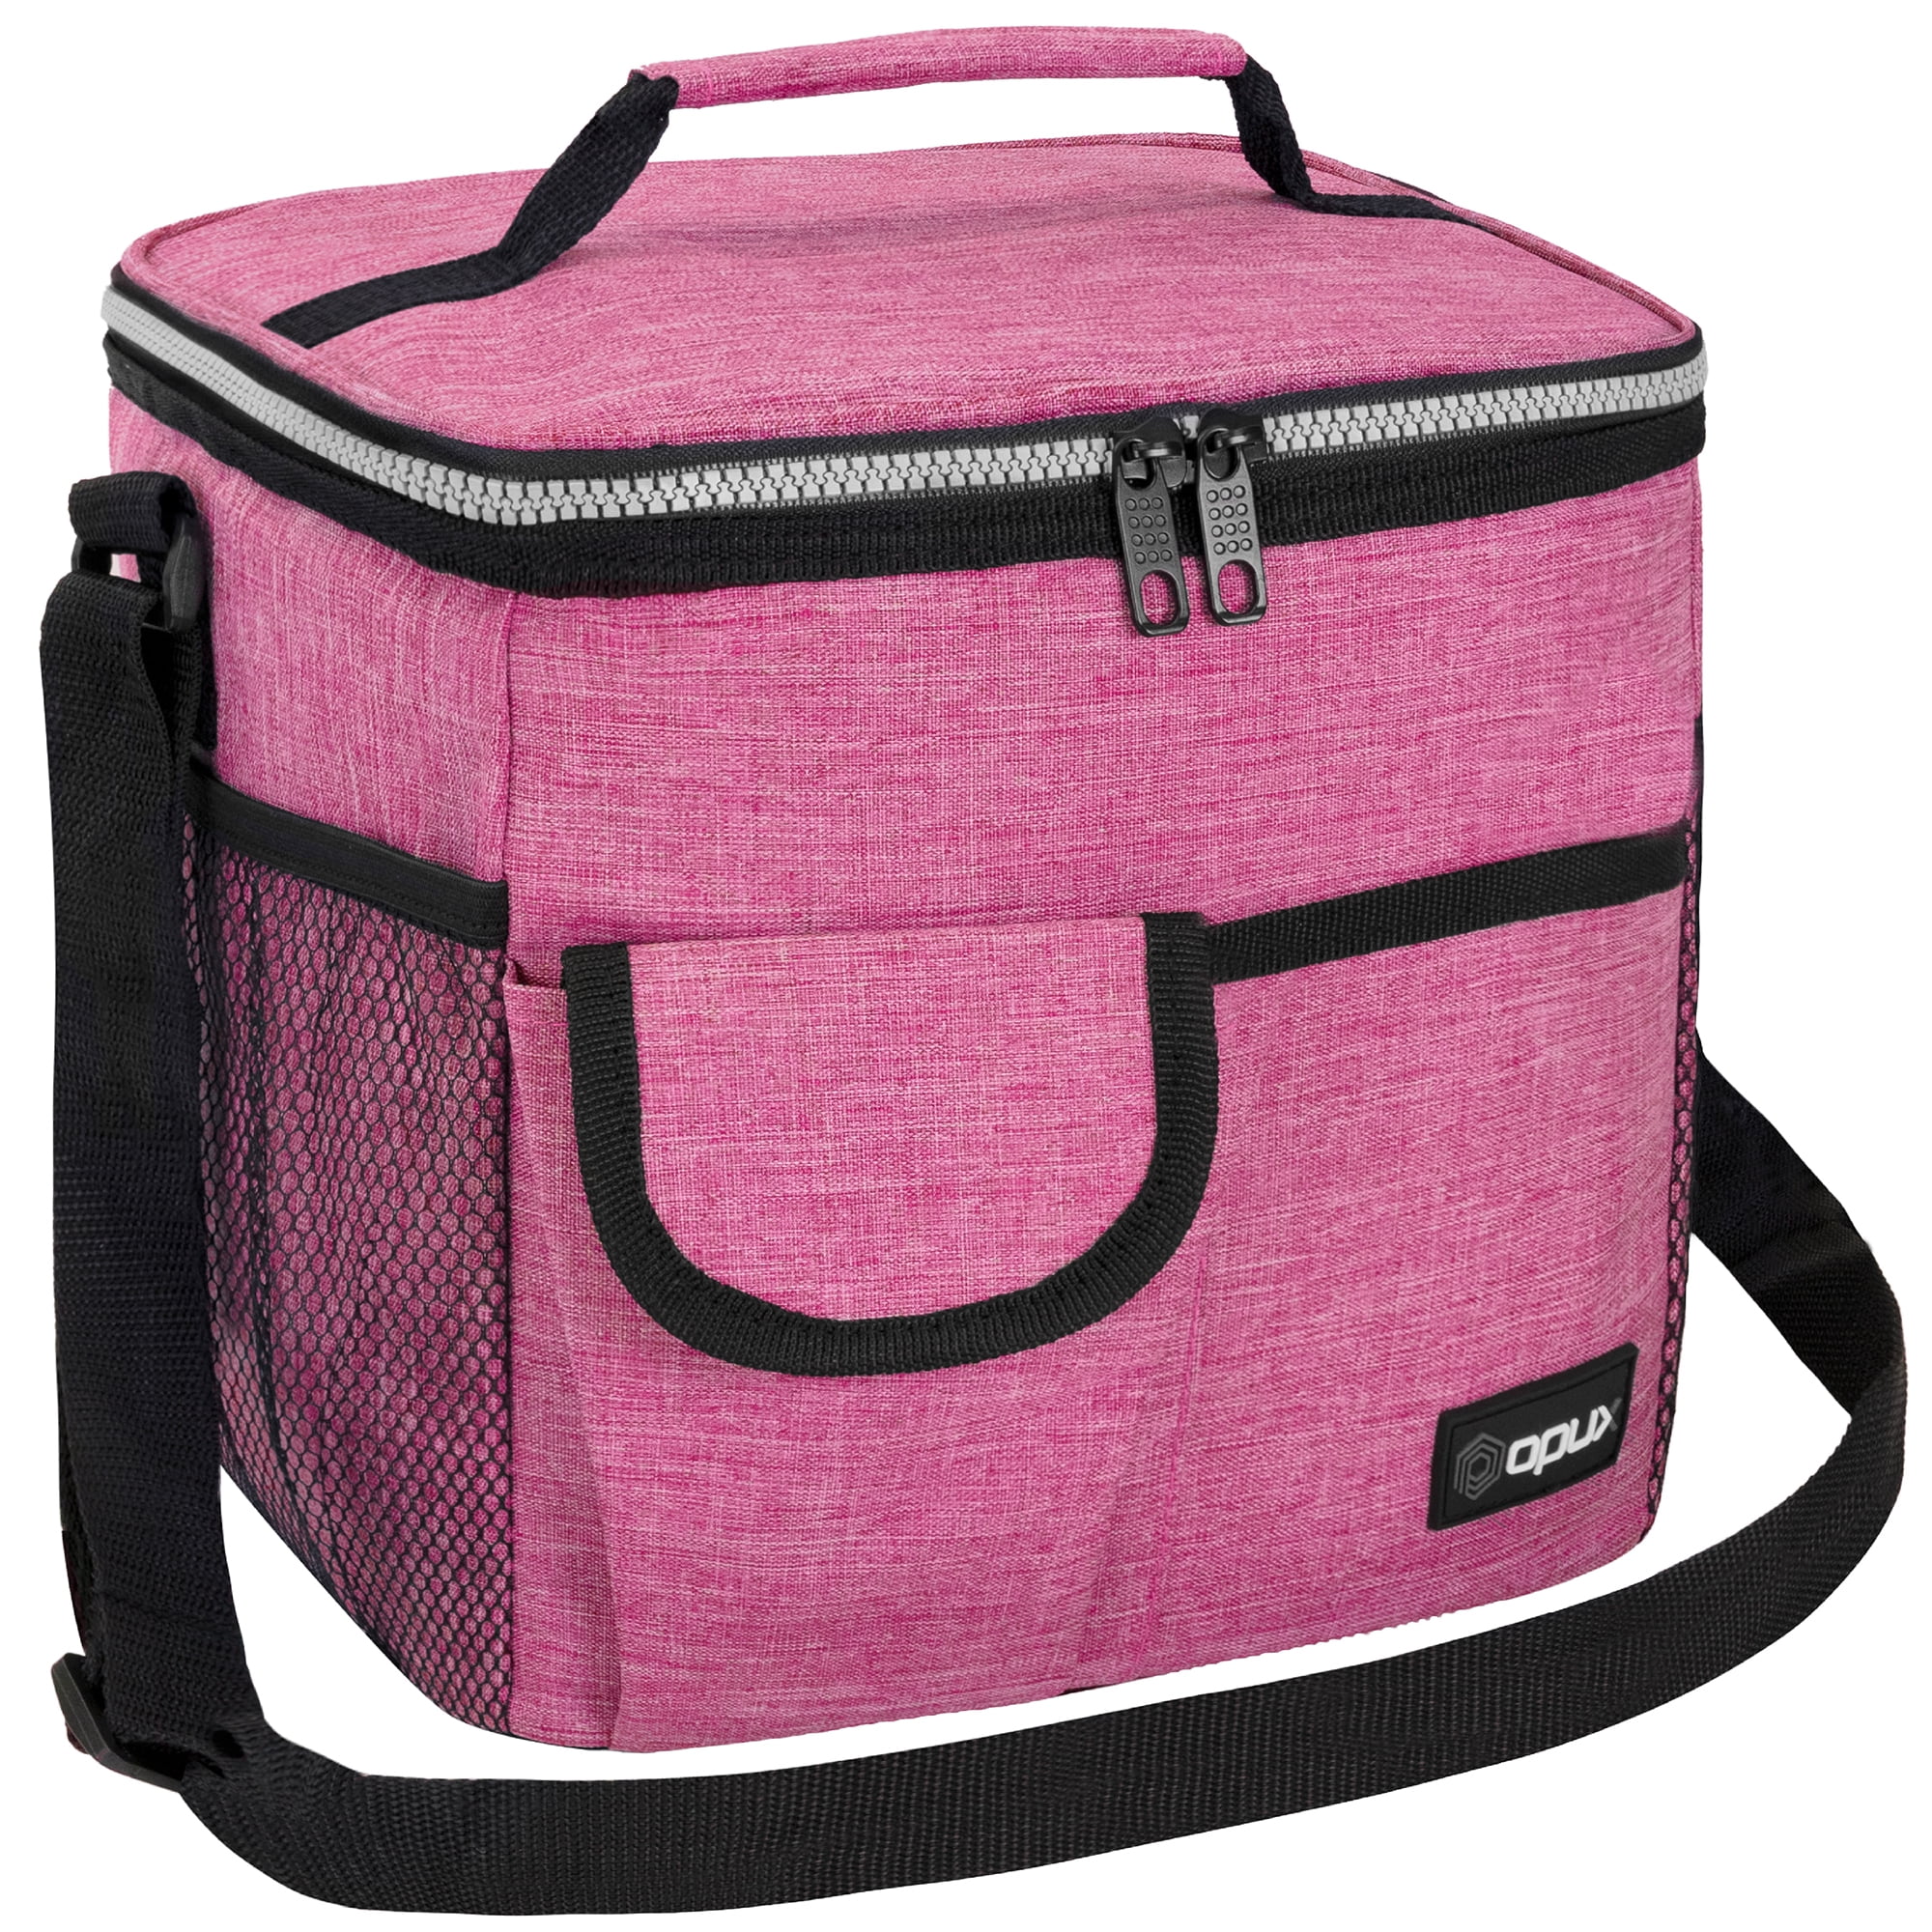 Lunch Bags Women - Insulated Womens Lunch Bag - Leakproof Large Lunch Bag  with Adjustable Shoulder Strap, Lunch Box for Women Adults with Side  Pockets